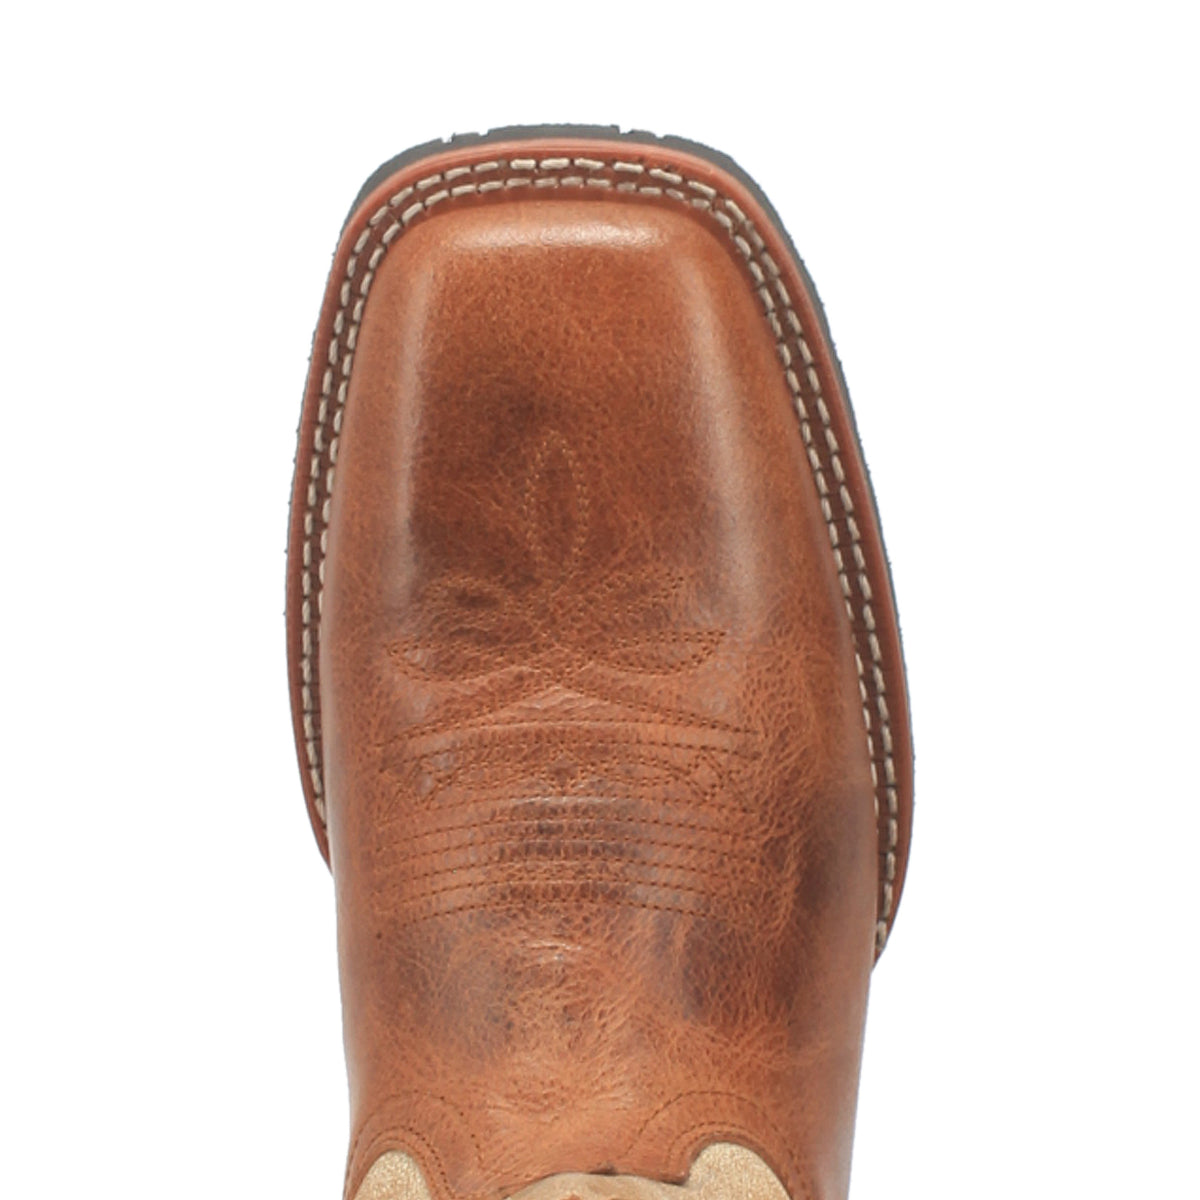 KOUFAX LEATHER BOOT Cover